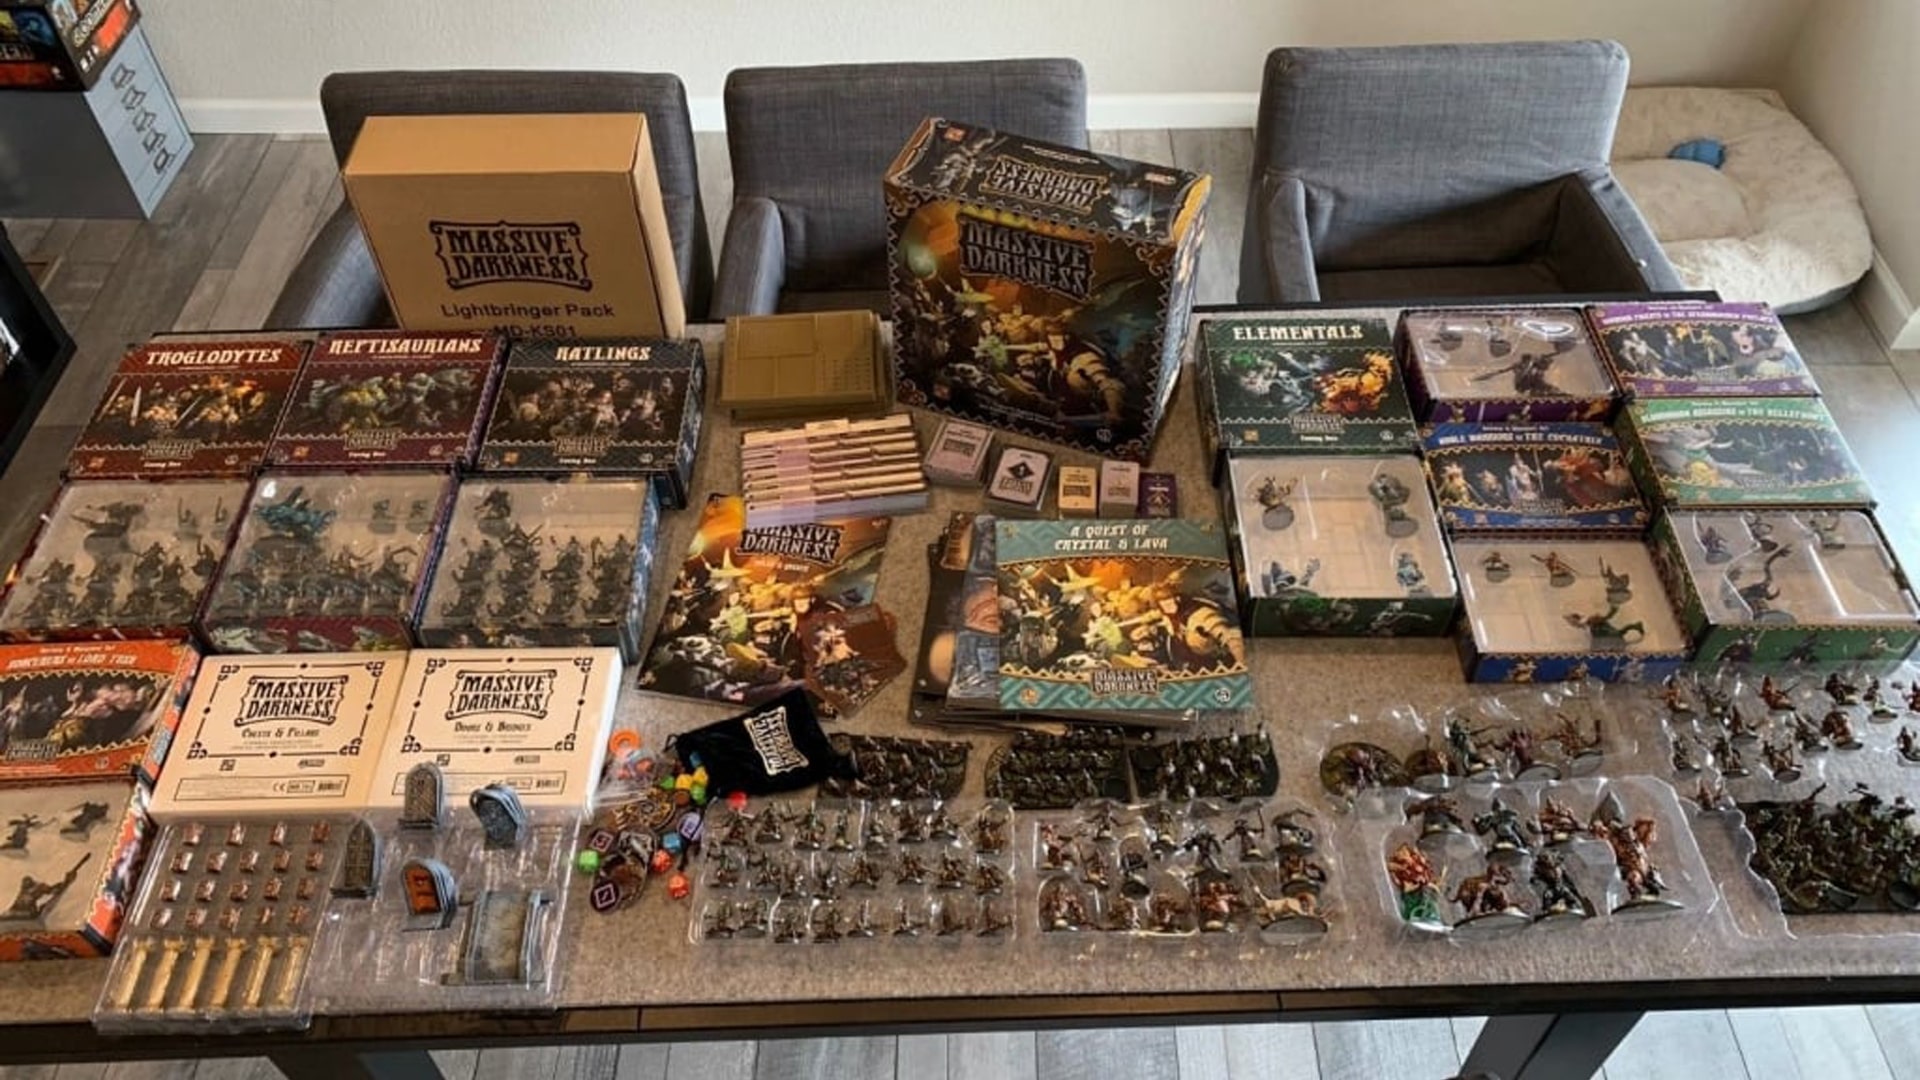 A detailed view of 'Massive Darkness' board game setup, featuring intricate miniatures and a dark, fantasy-themed game board.